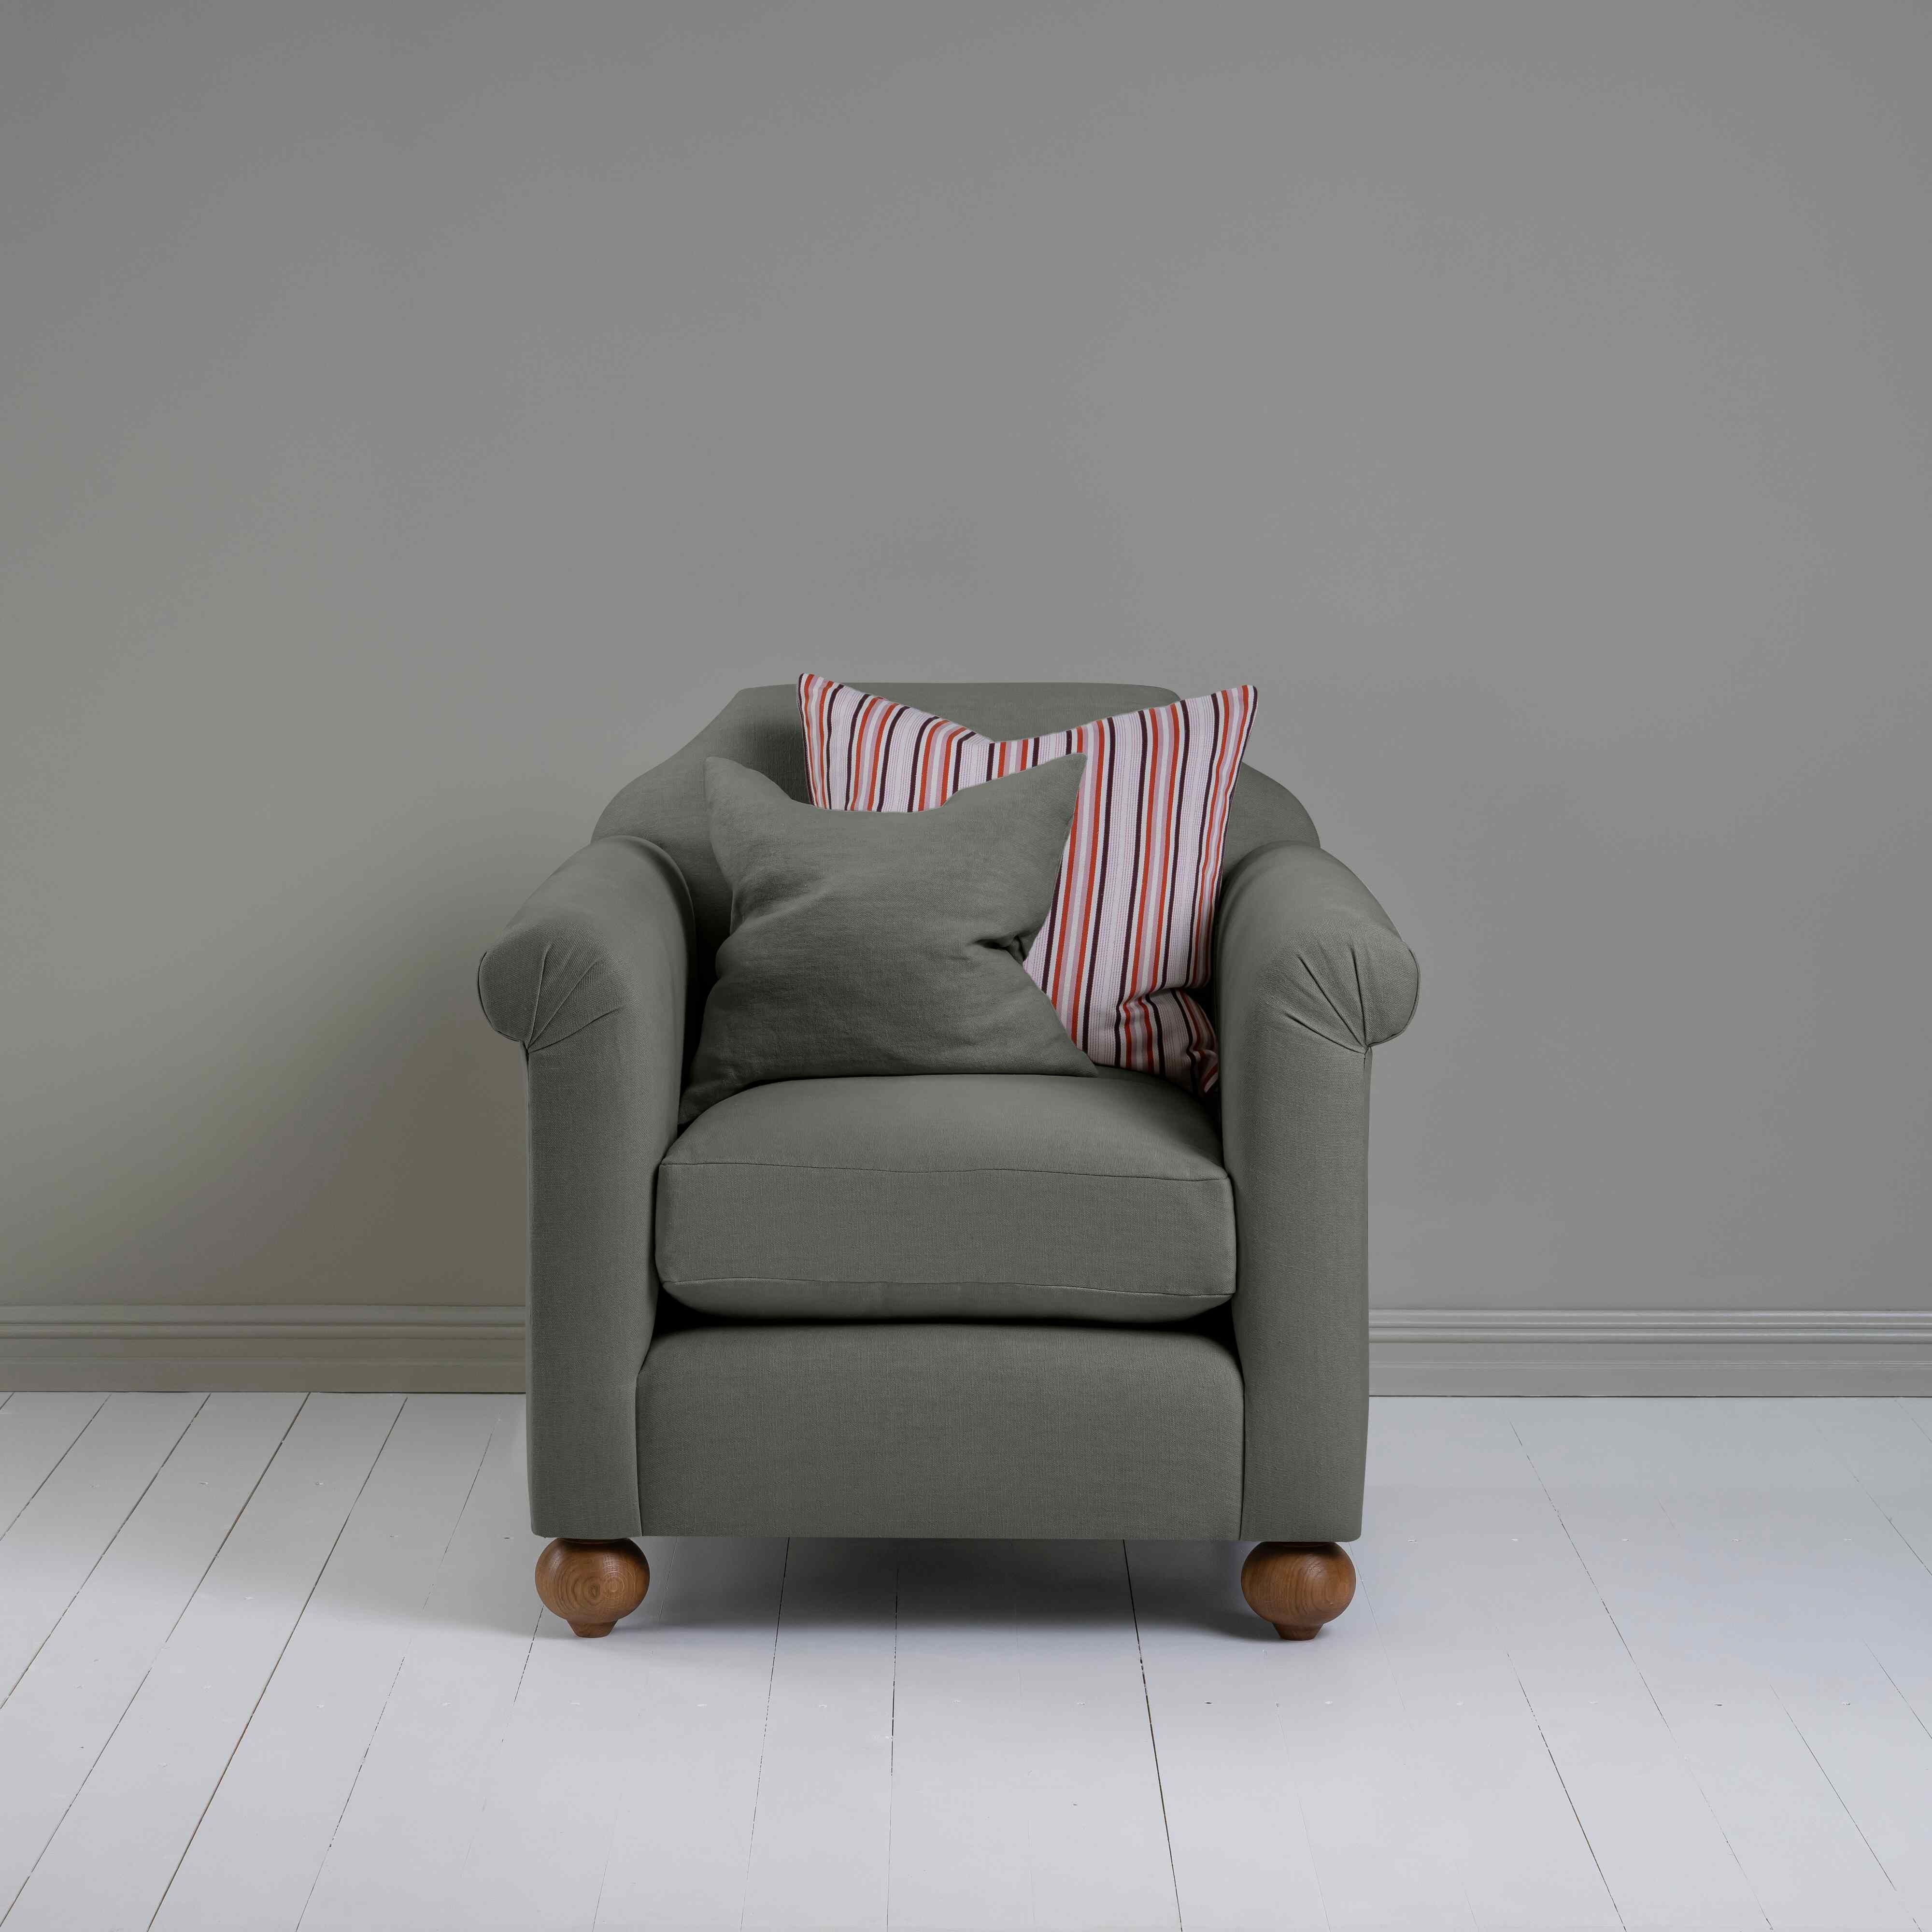  Dolittle Armchair in Laidback Linen Shadow 